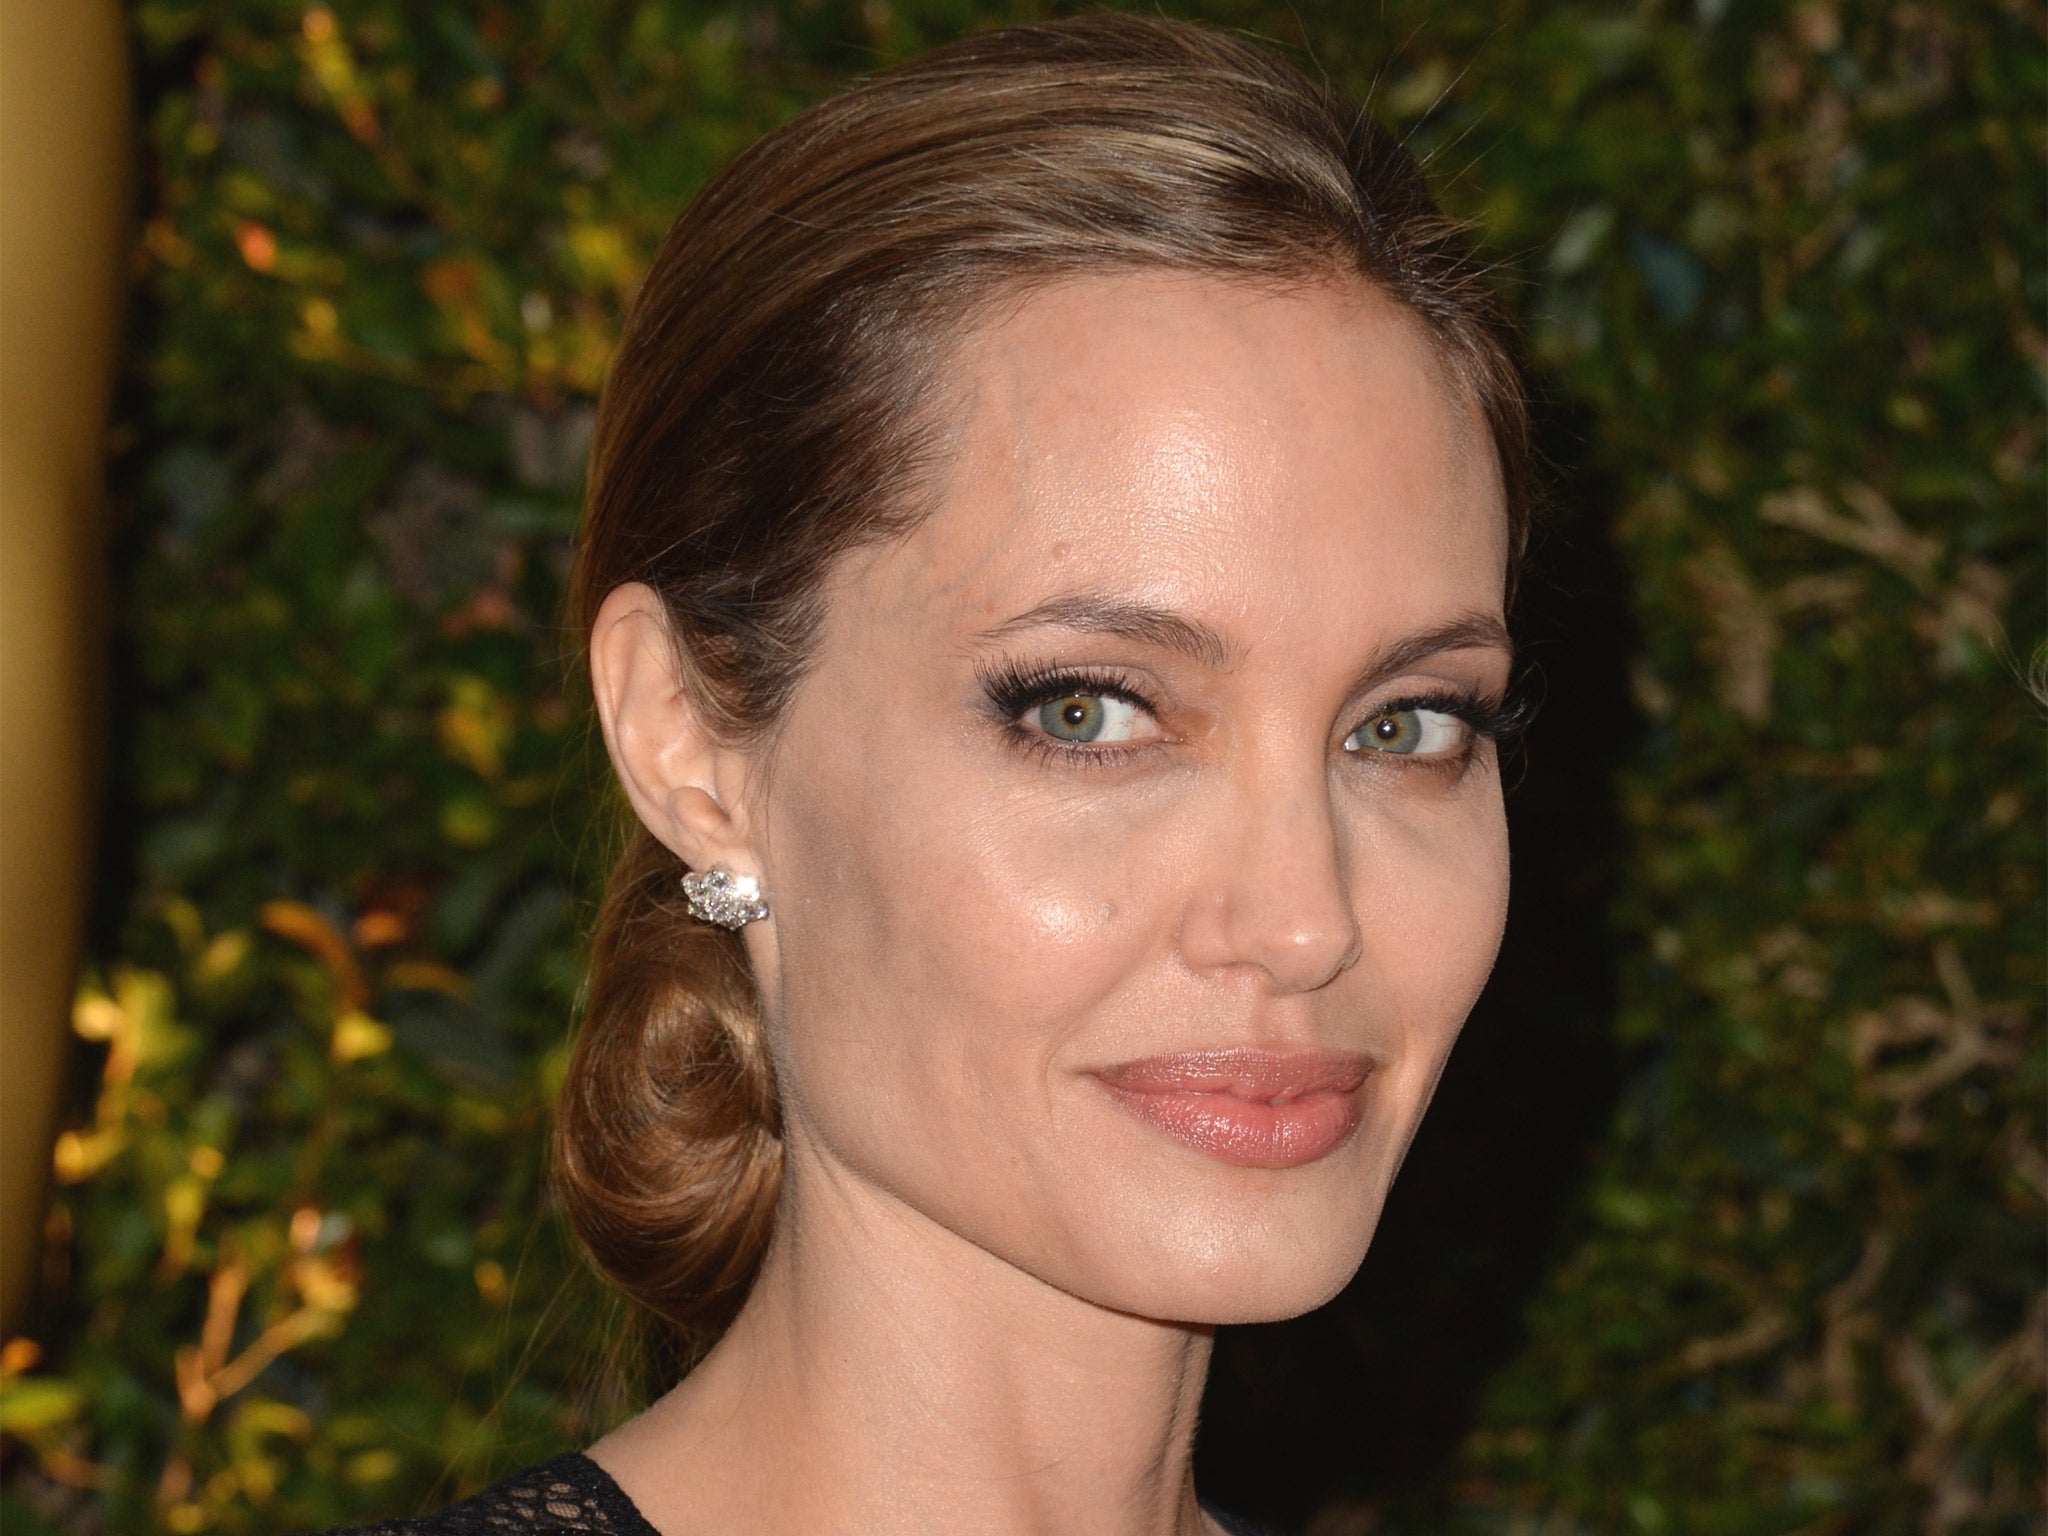 Anjelina Jolie had both breasts removed to reduce her cancer risk